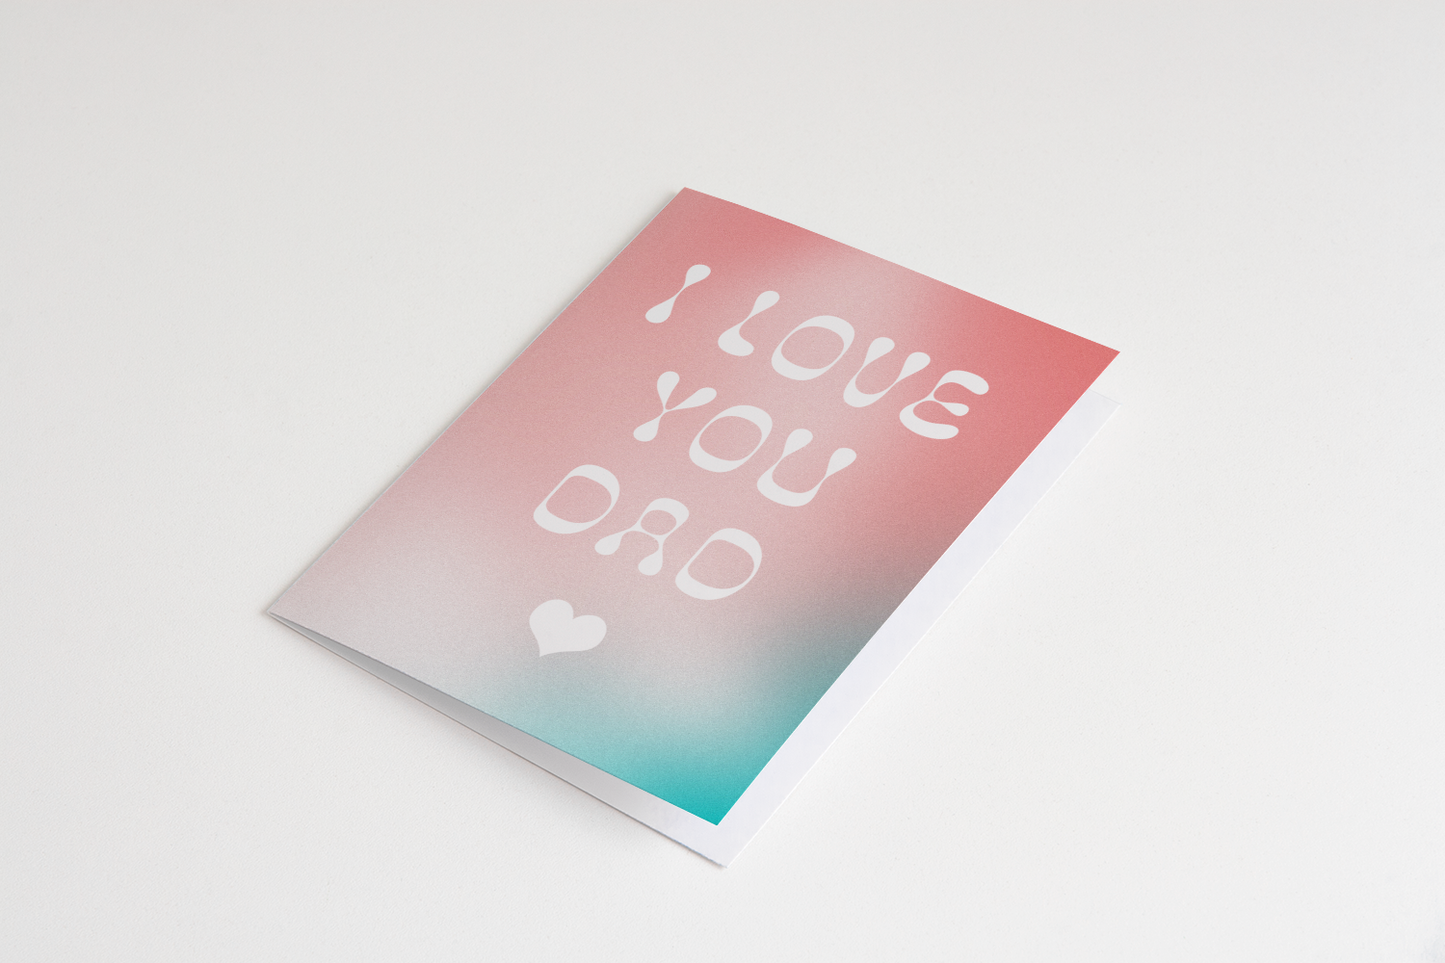 I Love You Dad Greeting Card